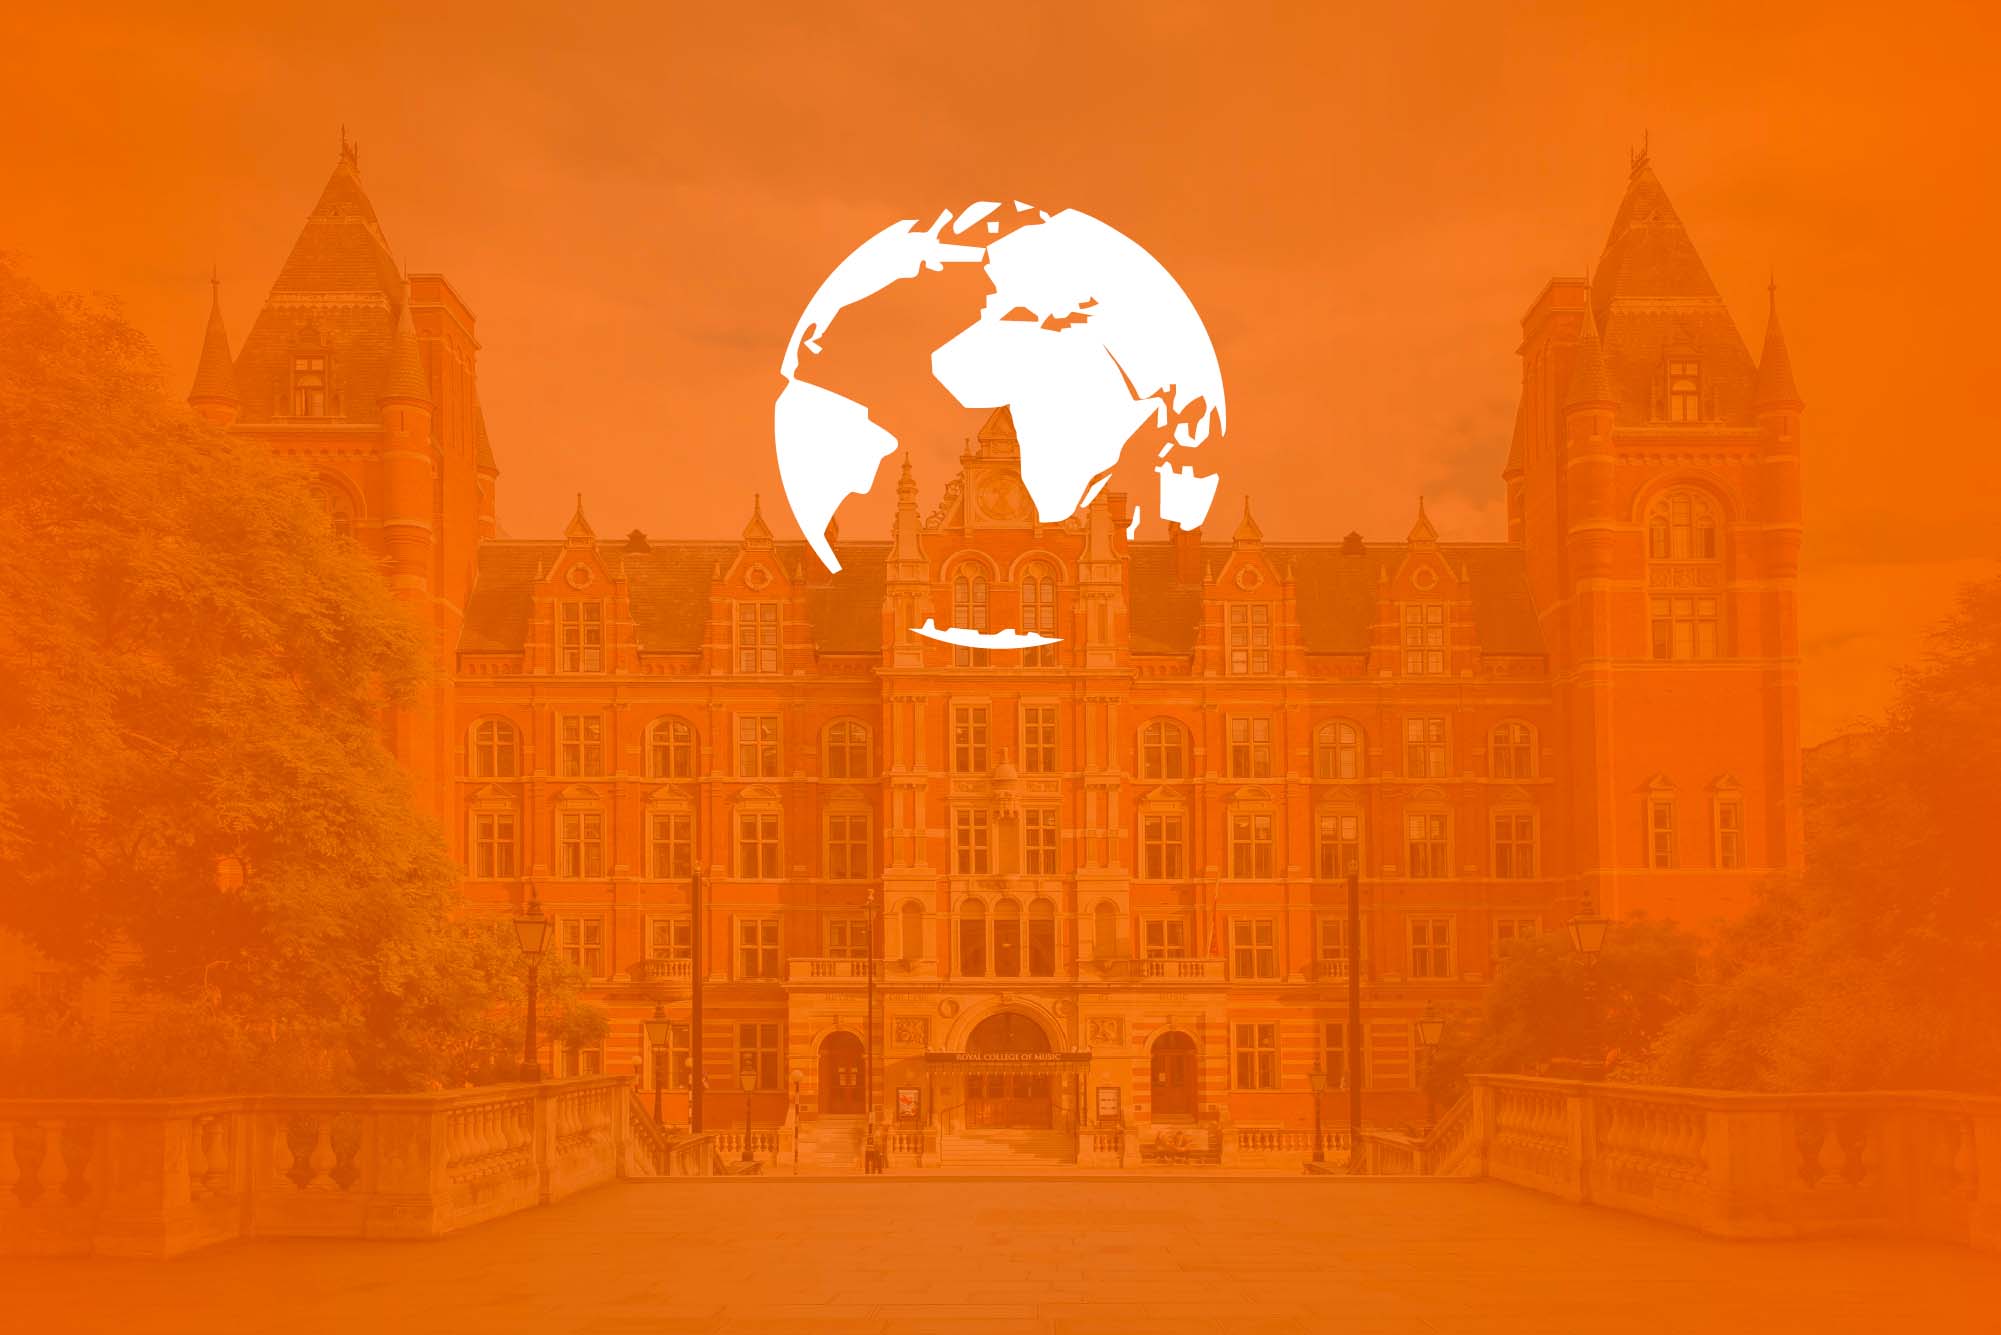 The RCM's Blomfield building with an orange filter over the image, and a graphic of a white globe above the building